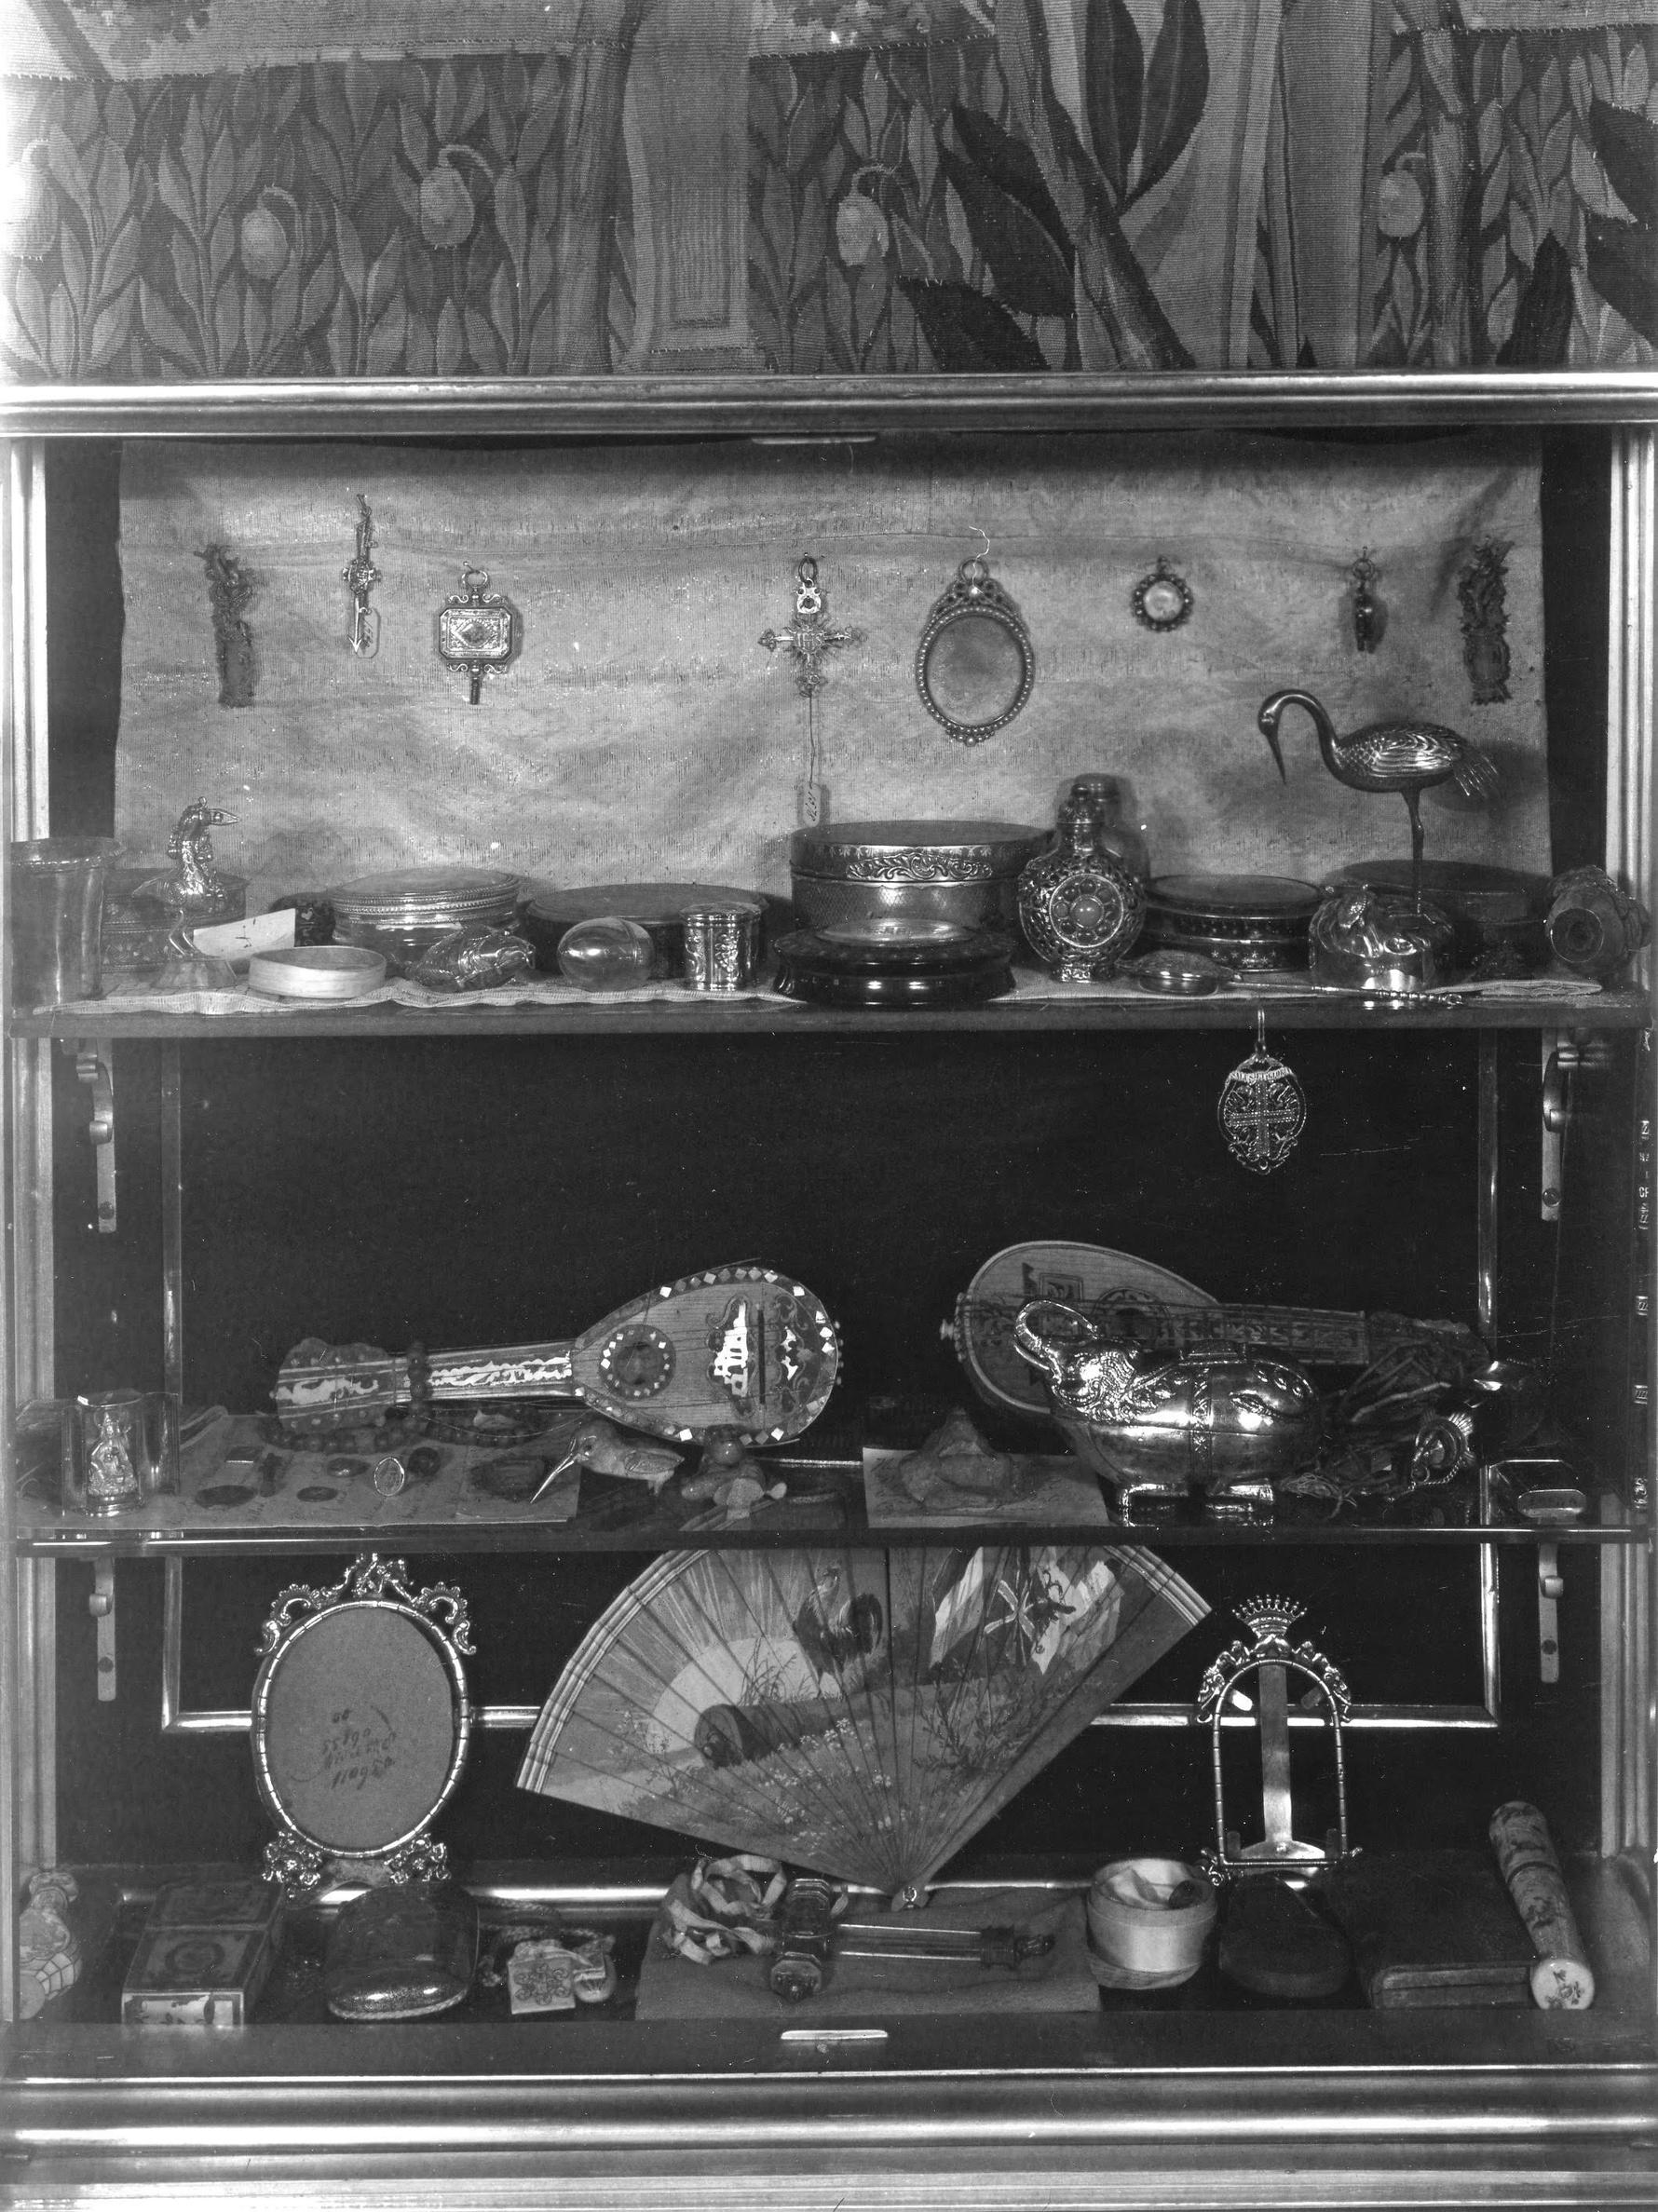 A black and white photograph of a vitrine in the Isabella Stewart Gardner Museum with assorted small objects displayed in its interior.